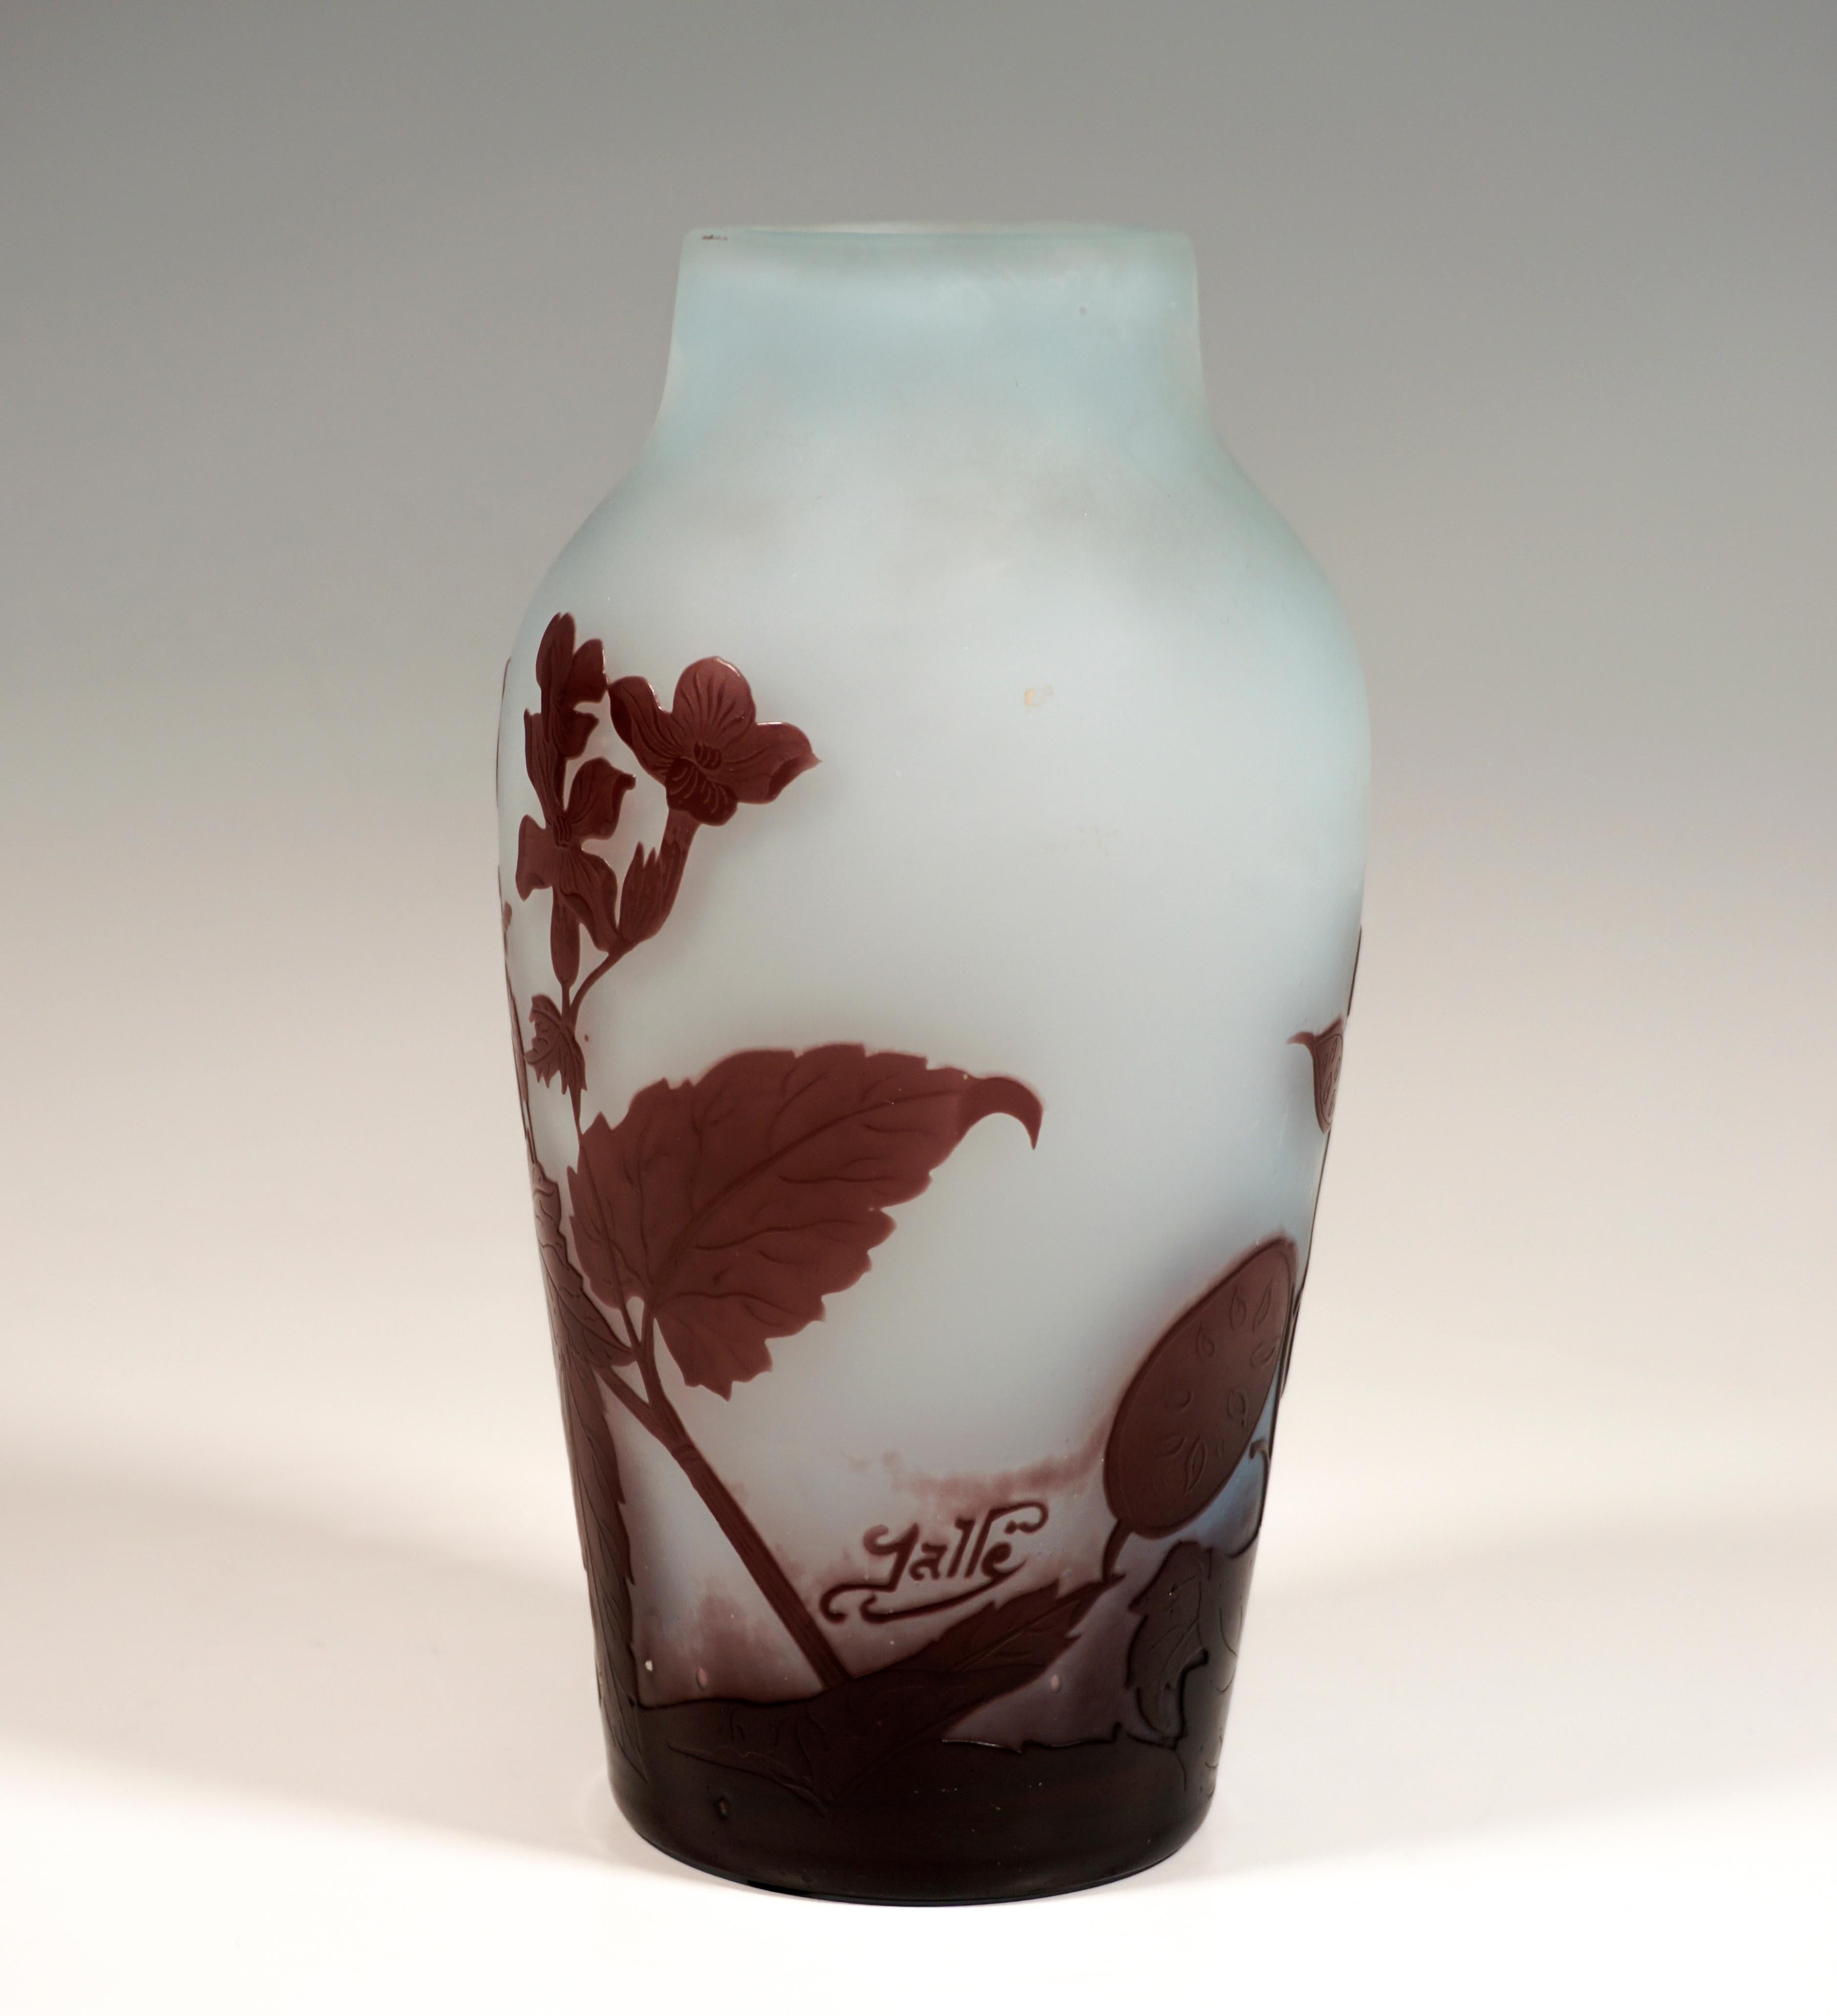 Vase in the form of a baluster: Flush foot, high, bulbous body with set off, short neck on gently sloping shoulders. Colorless glass with light blue color powder inclusions, burgundy overlaid on the outside, highly etched floral decoration with